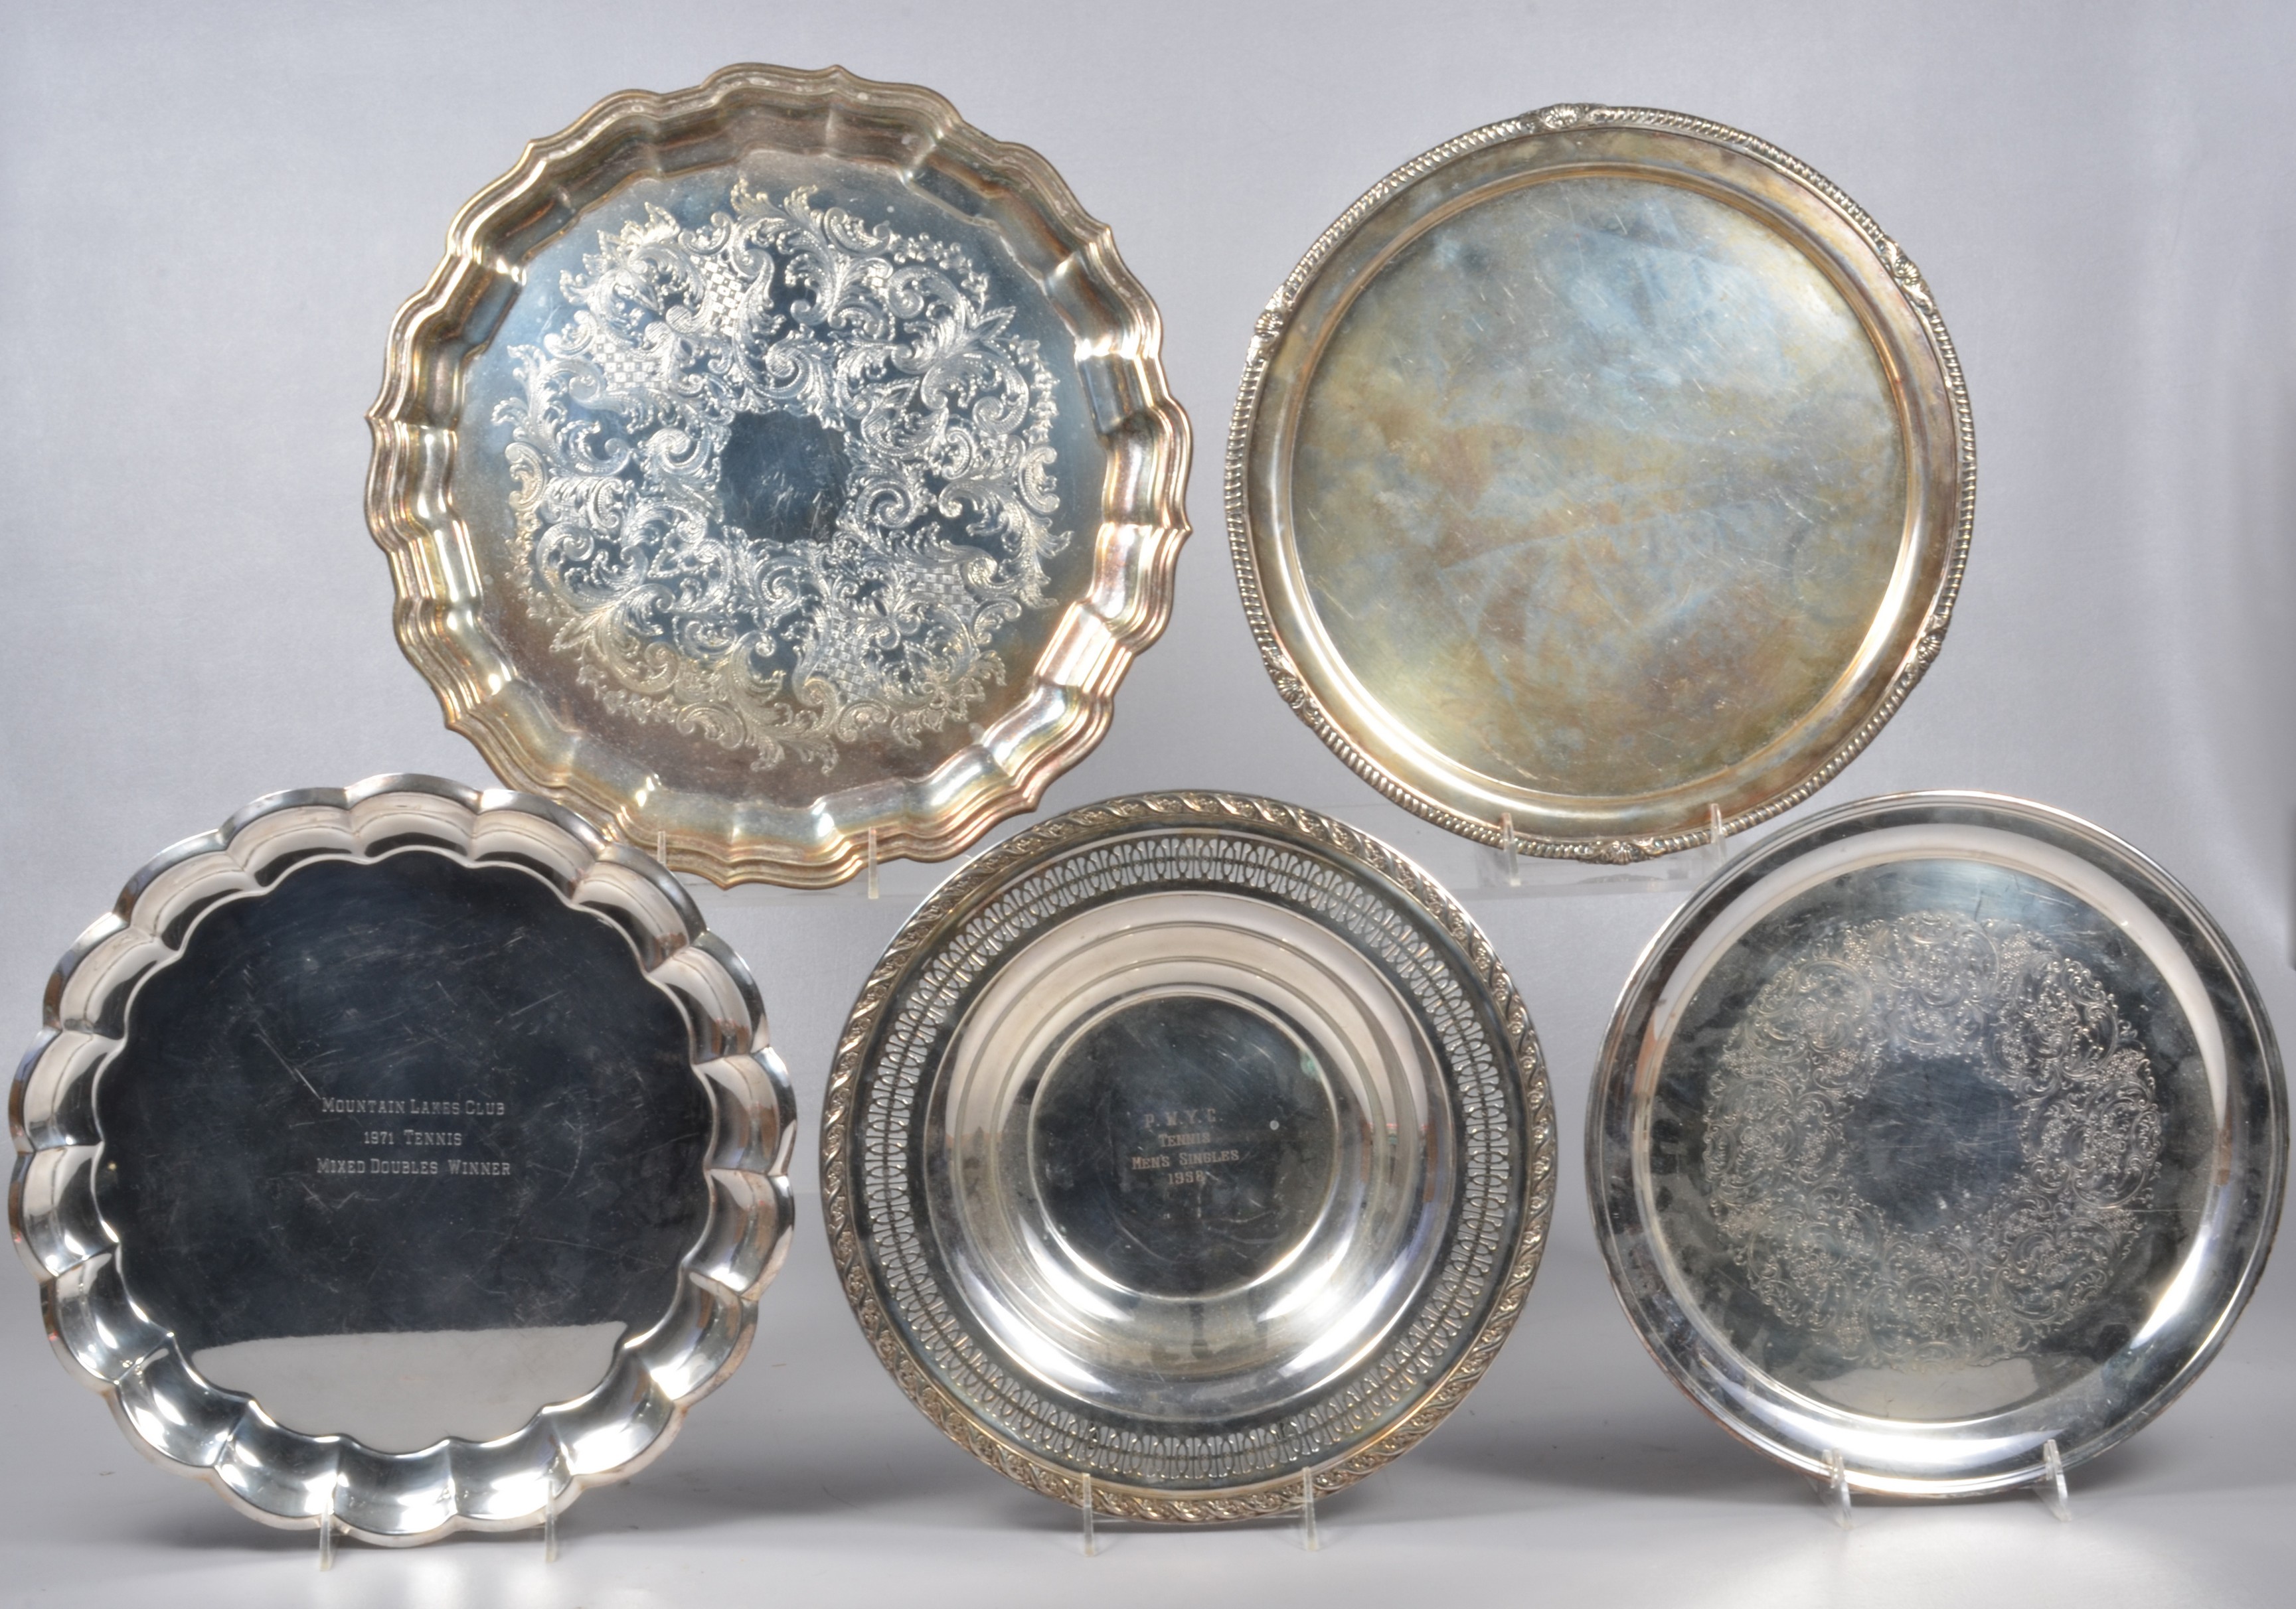  5 Silverplate trays and dishes 3b688e